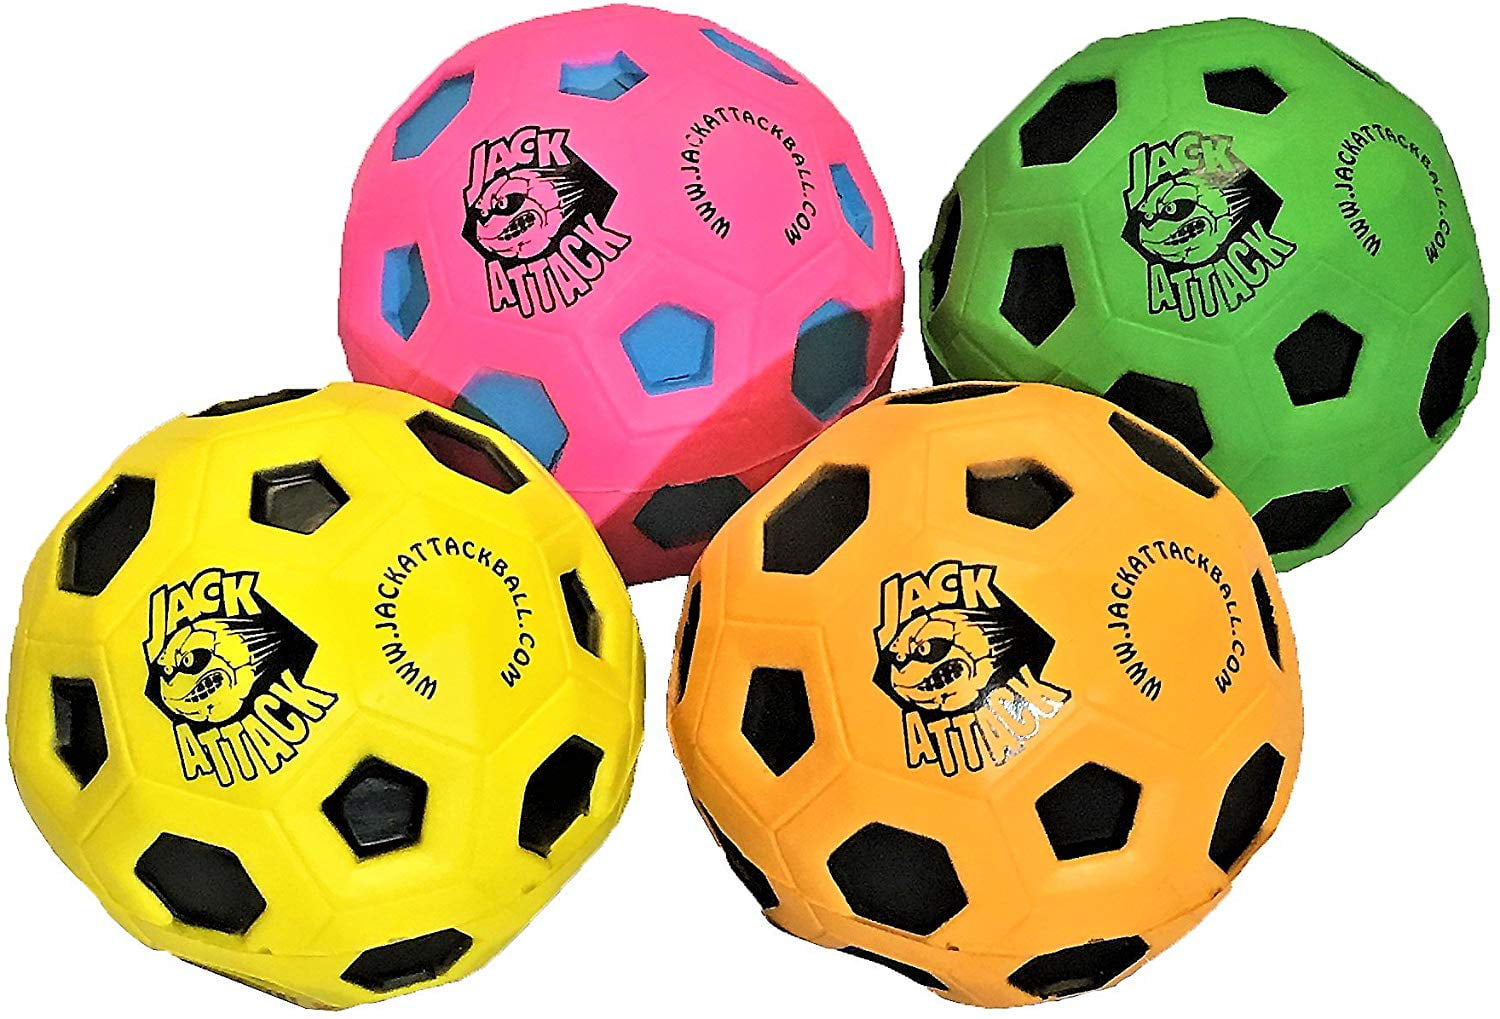 Jack Attack Xtreme High Bounce Ball 2.8 in Rubber Agility Ball Let Them Play Outside Use in The Park Playground Backyard Streets Training Field Improve Reaction Time Wholesale Bulk Gifts